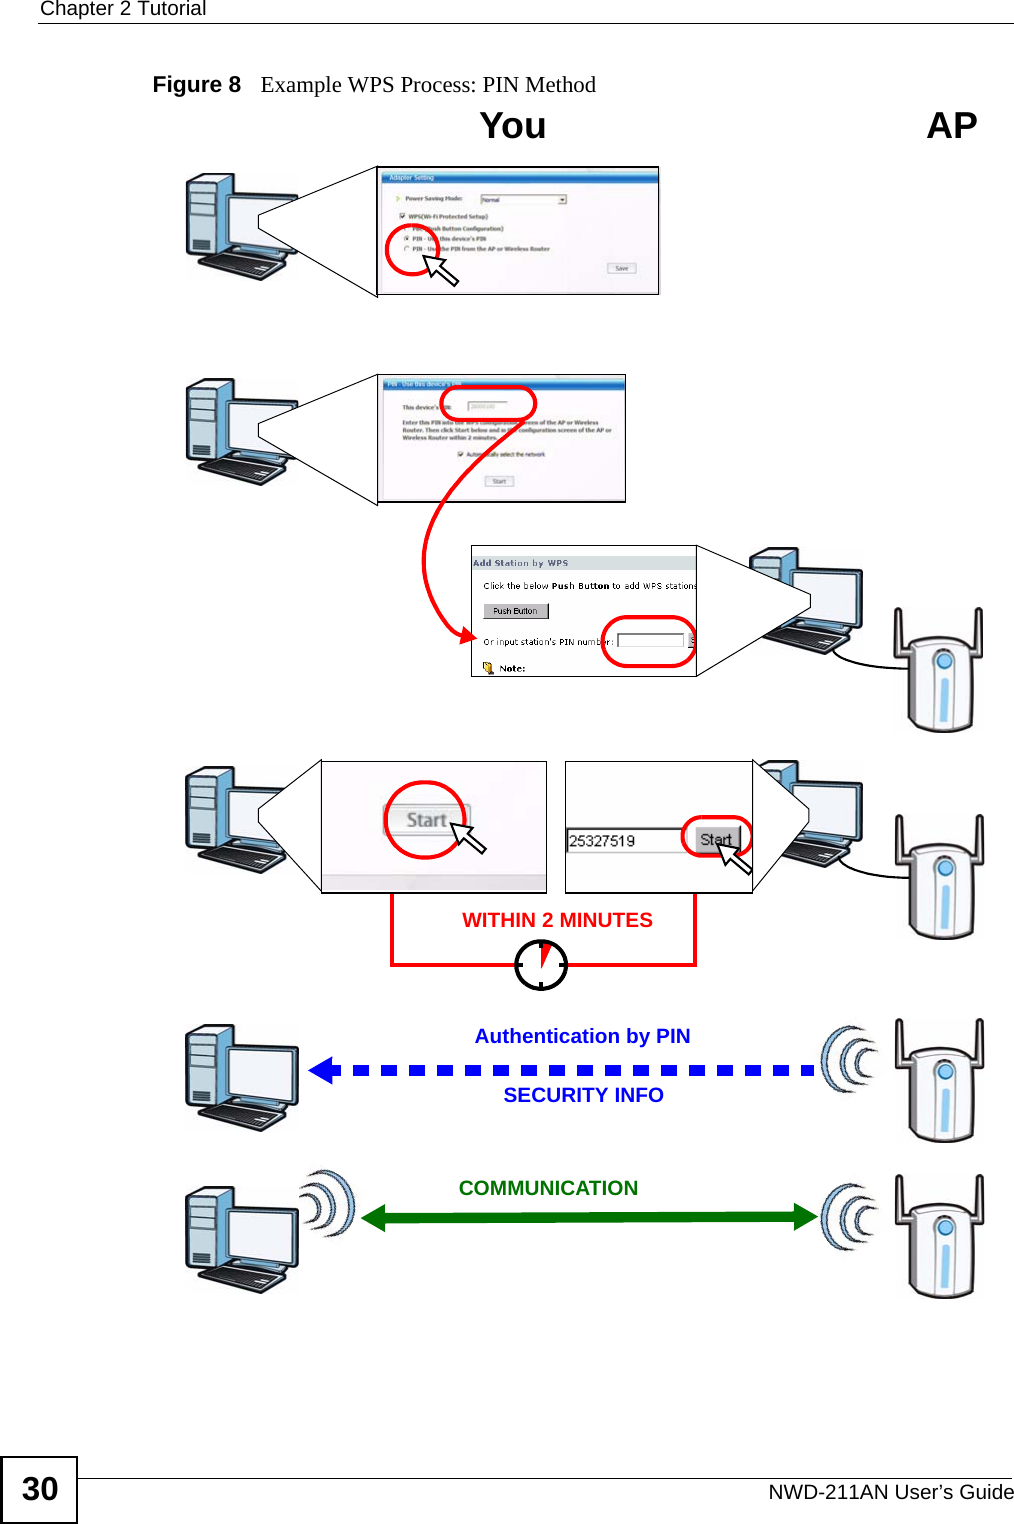 Chapter 2 TutorialNWD-211AN User’s Guide30Figure 8   Example WPS Process: PIN MethodAuthentication by PINSECURITY INFOWITHIN 2 MINUTESCOMMUNICATIONYou AP